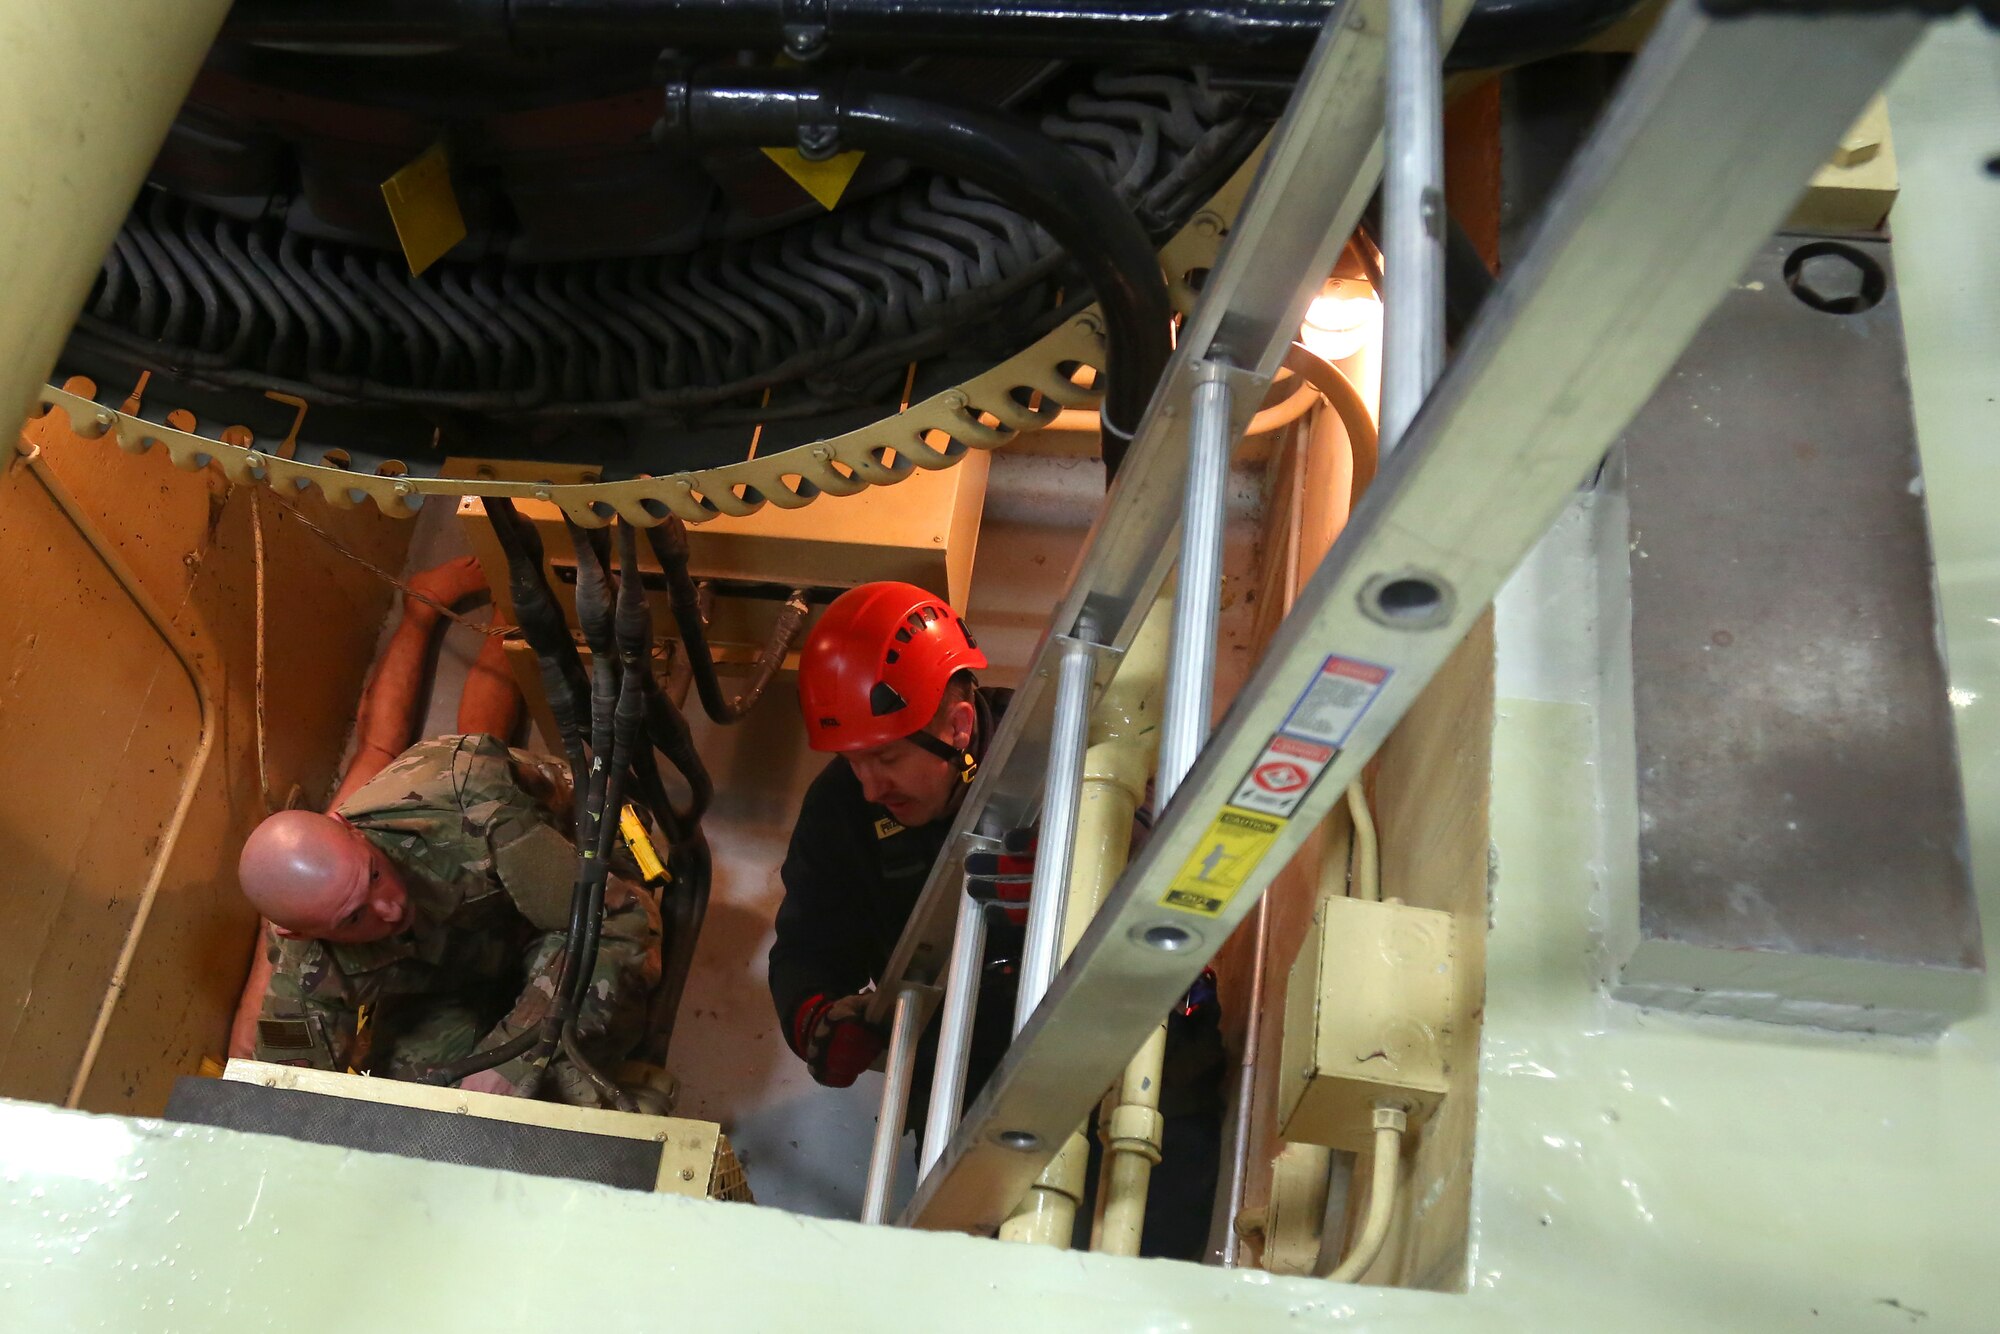 Master Sgt. Trever Bohling, Western Air Defense Sector, tends to a simulated patient in confined space rescue Nov. 11, 2018, on Joint Base Lewis-McChord, Wash. Bohling administered first aid to the simulated patient as the emergency personnel arrive on scene. (U.S. Air National Guard photo by Master Sgt. Tim Chacon)